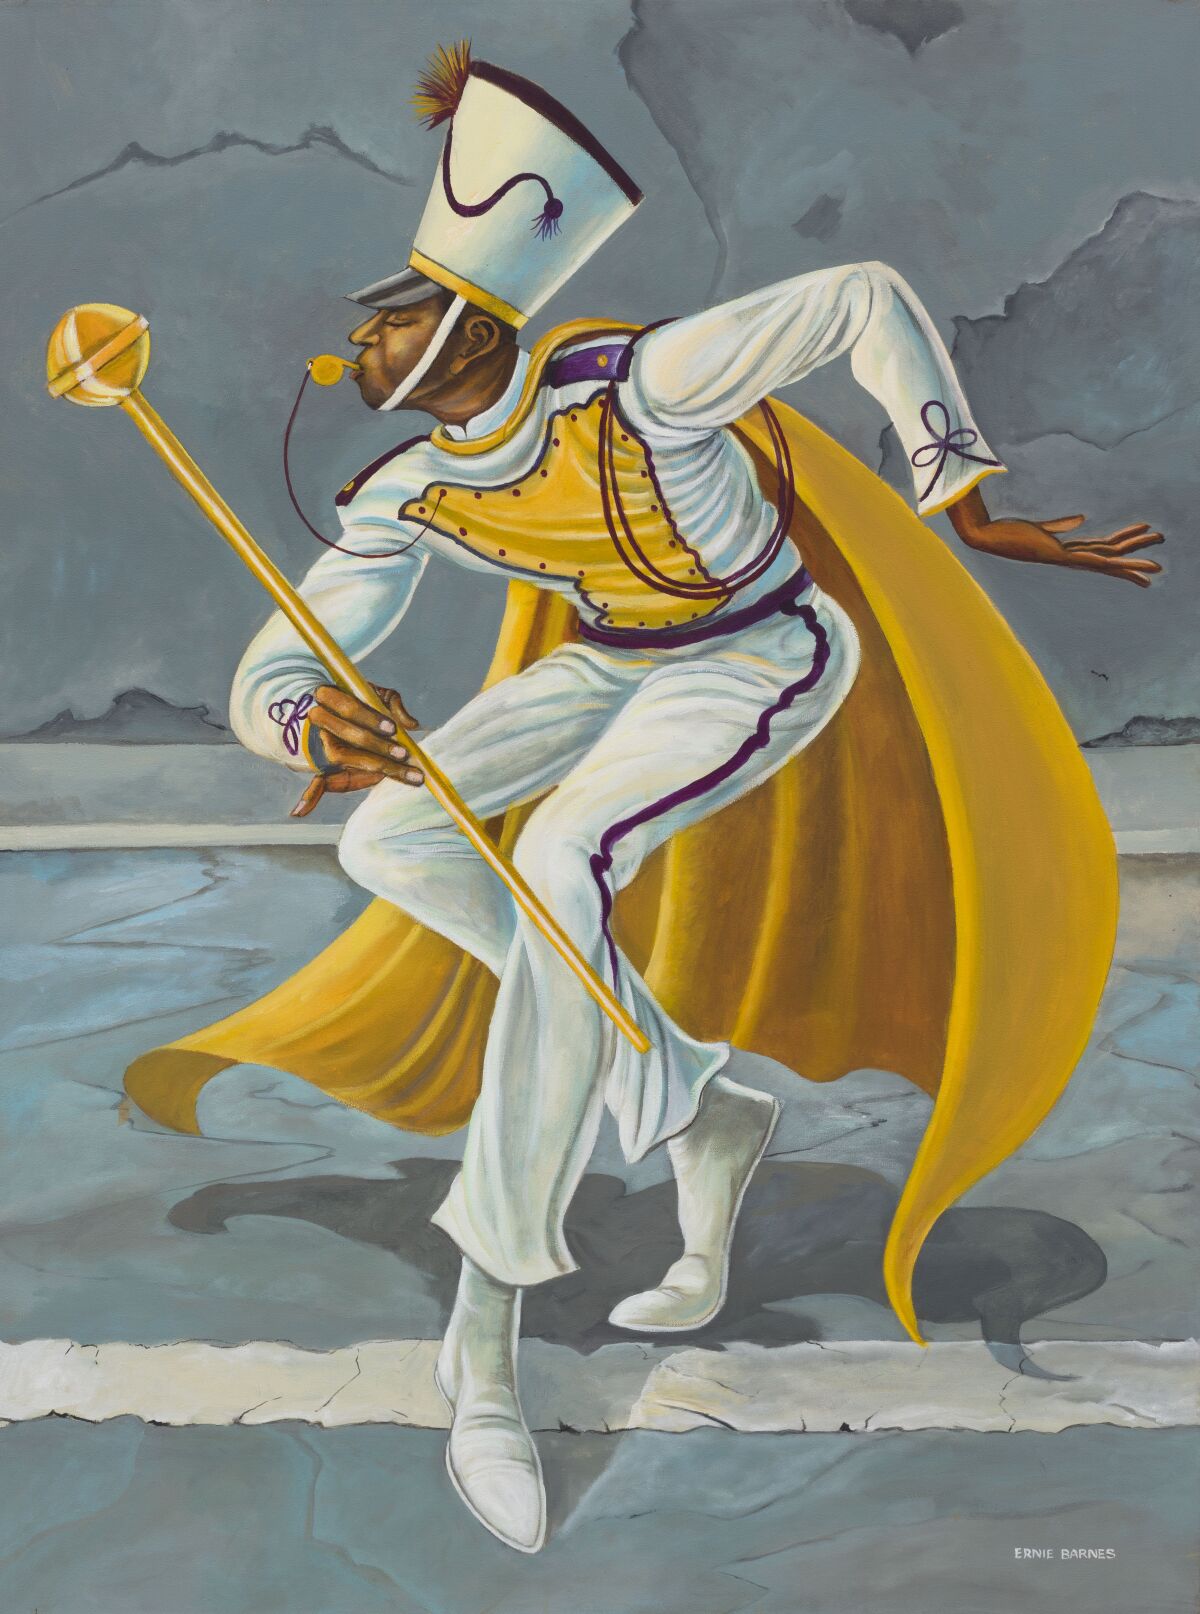 Ernie Barnes' "The Drum Major" (2003), which the Lucas Museum acquired in 2020.